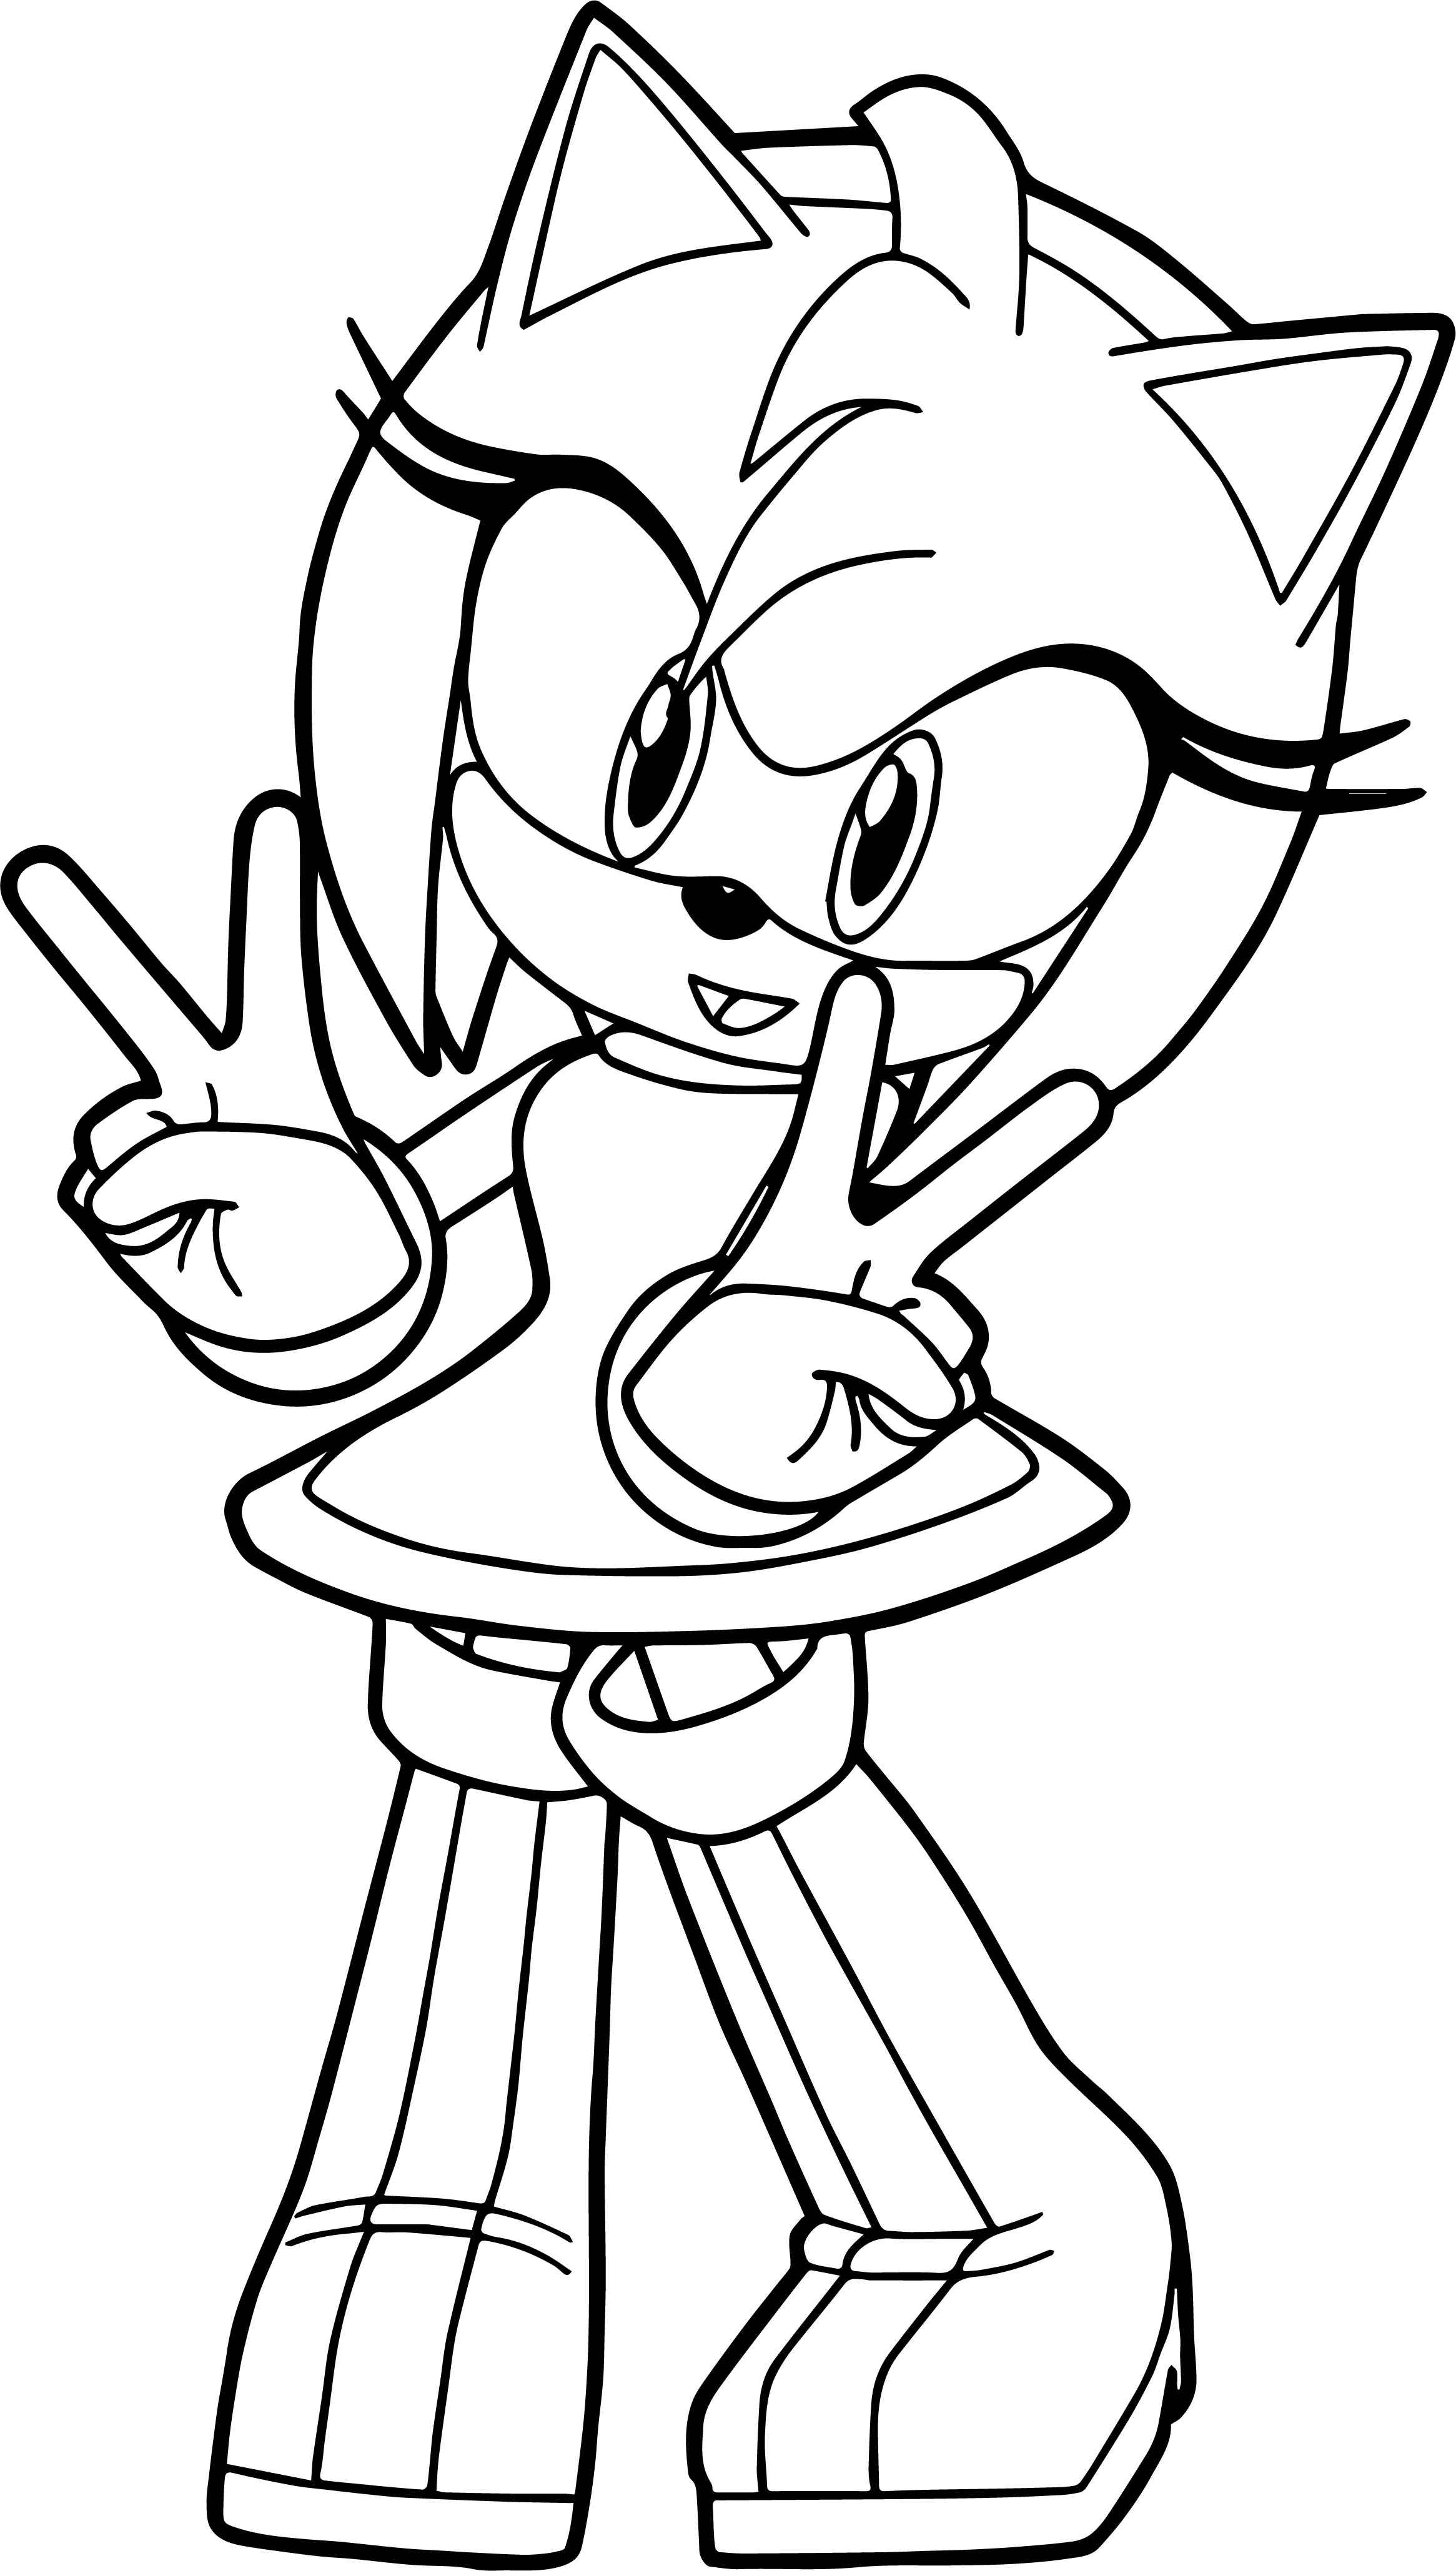 Pleasant Amy Rose Coloring Page | Wecoloringpage.com